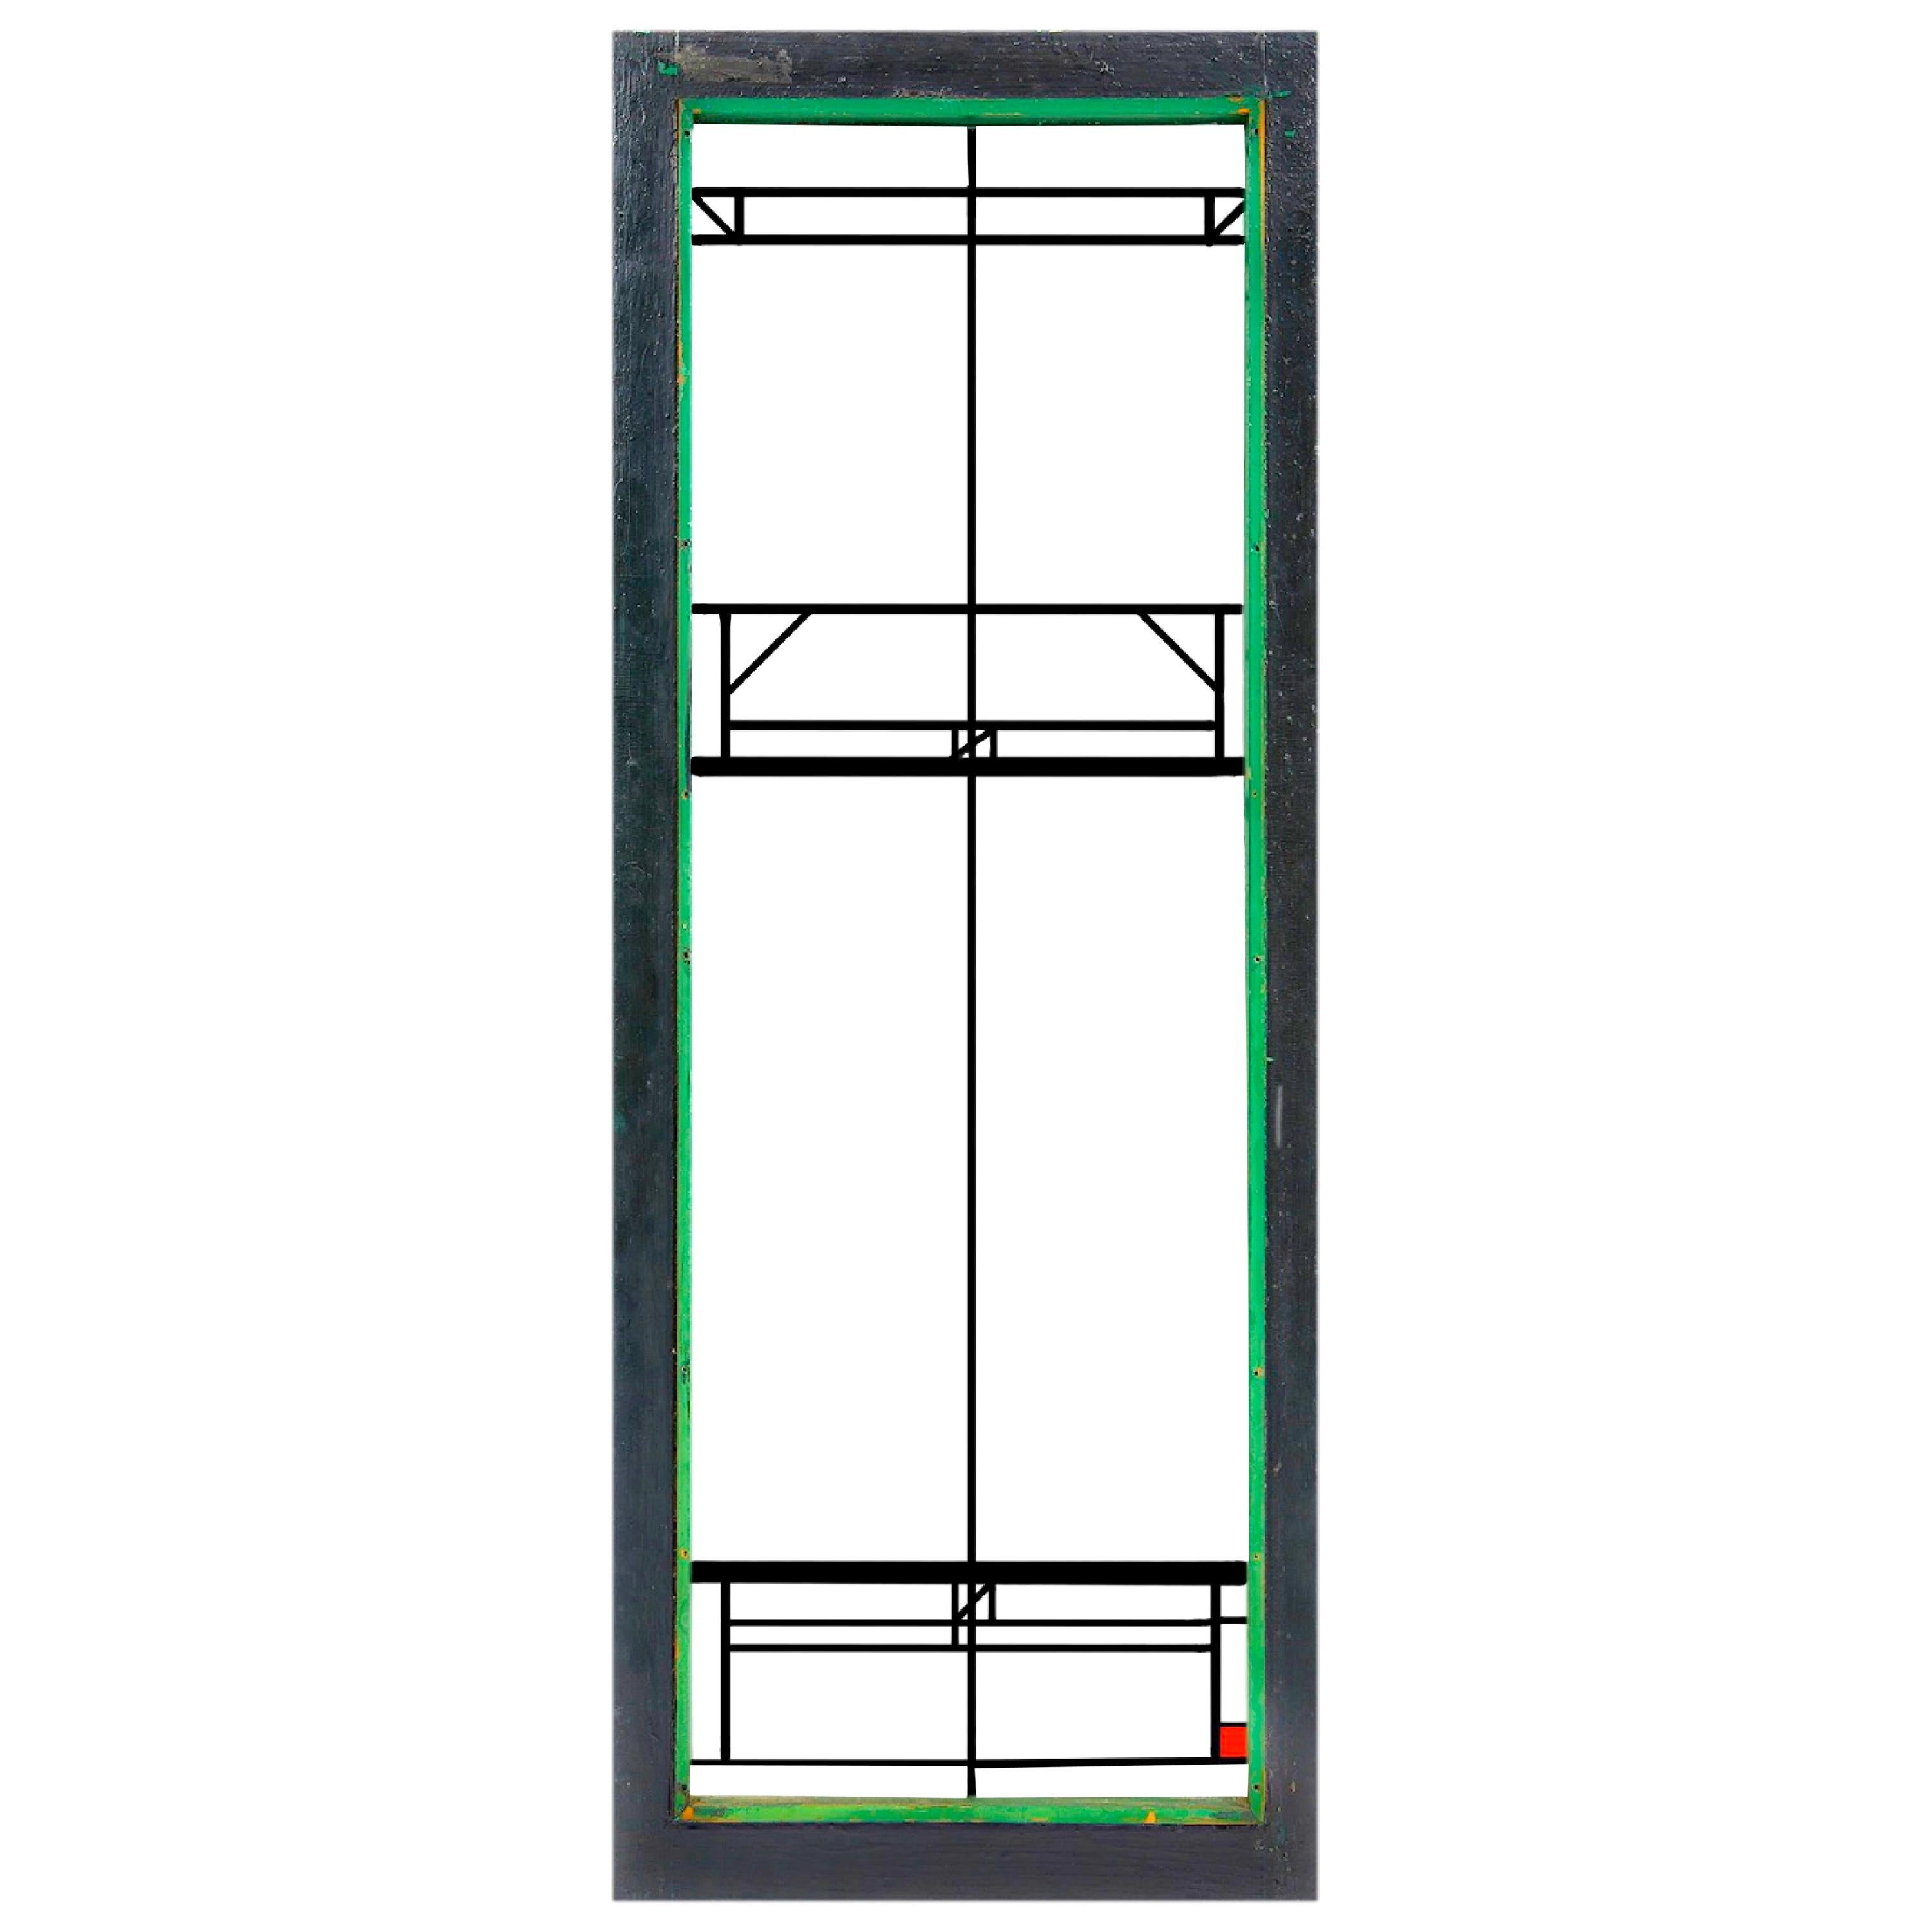 Frank Lloyd Wright Stained Glass Window "Northome House” LightScreen 1912 - 1914